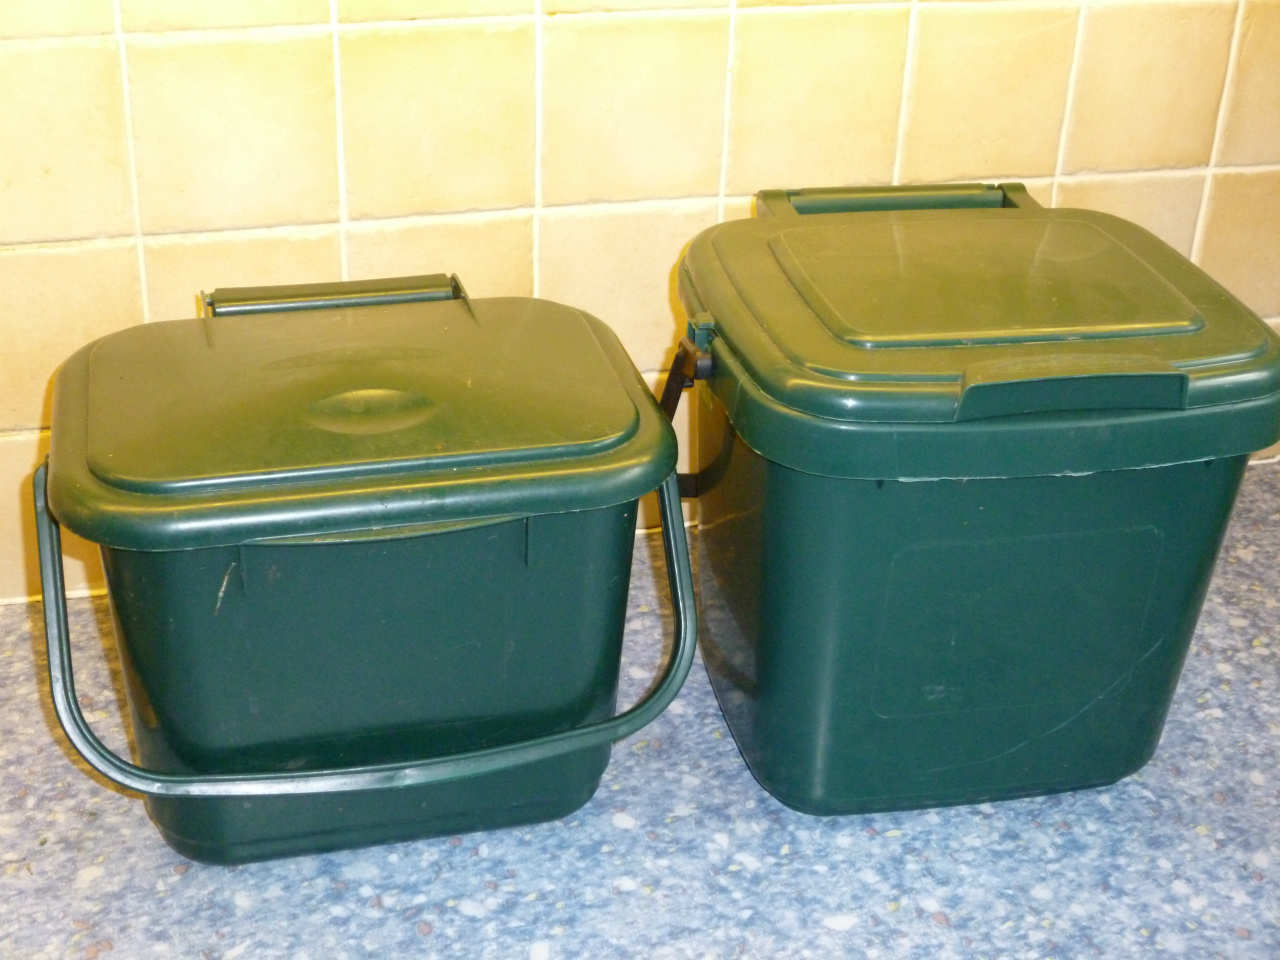 25L 50 Extra Thick allBIO Fully Compostable Food Waste Caddy Liners Bin Bags 